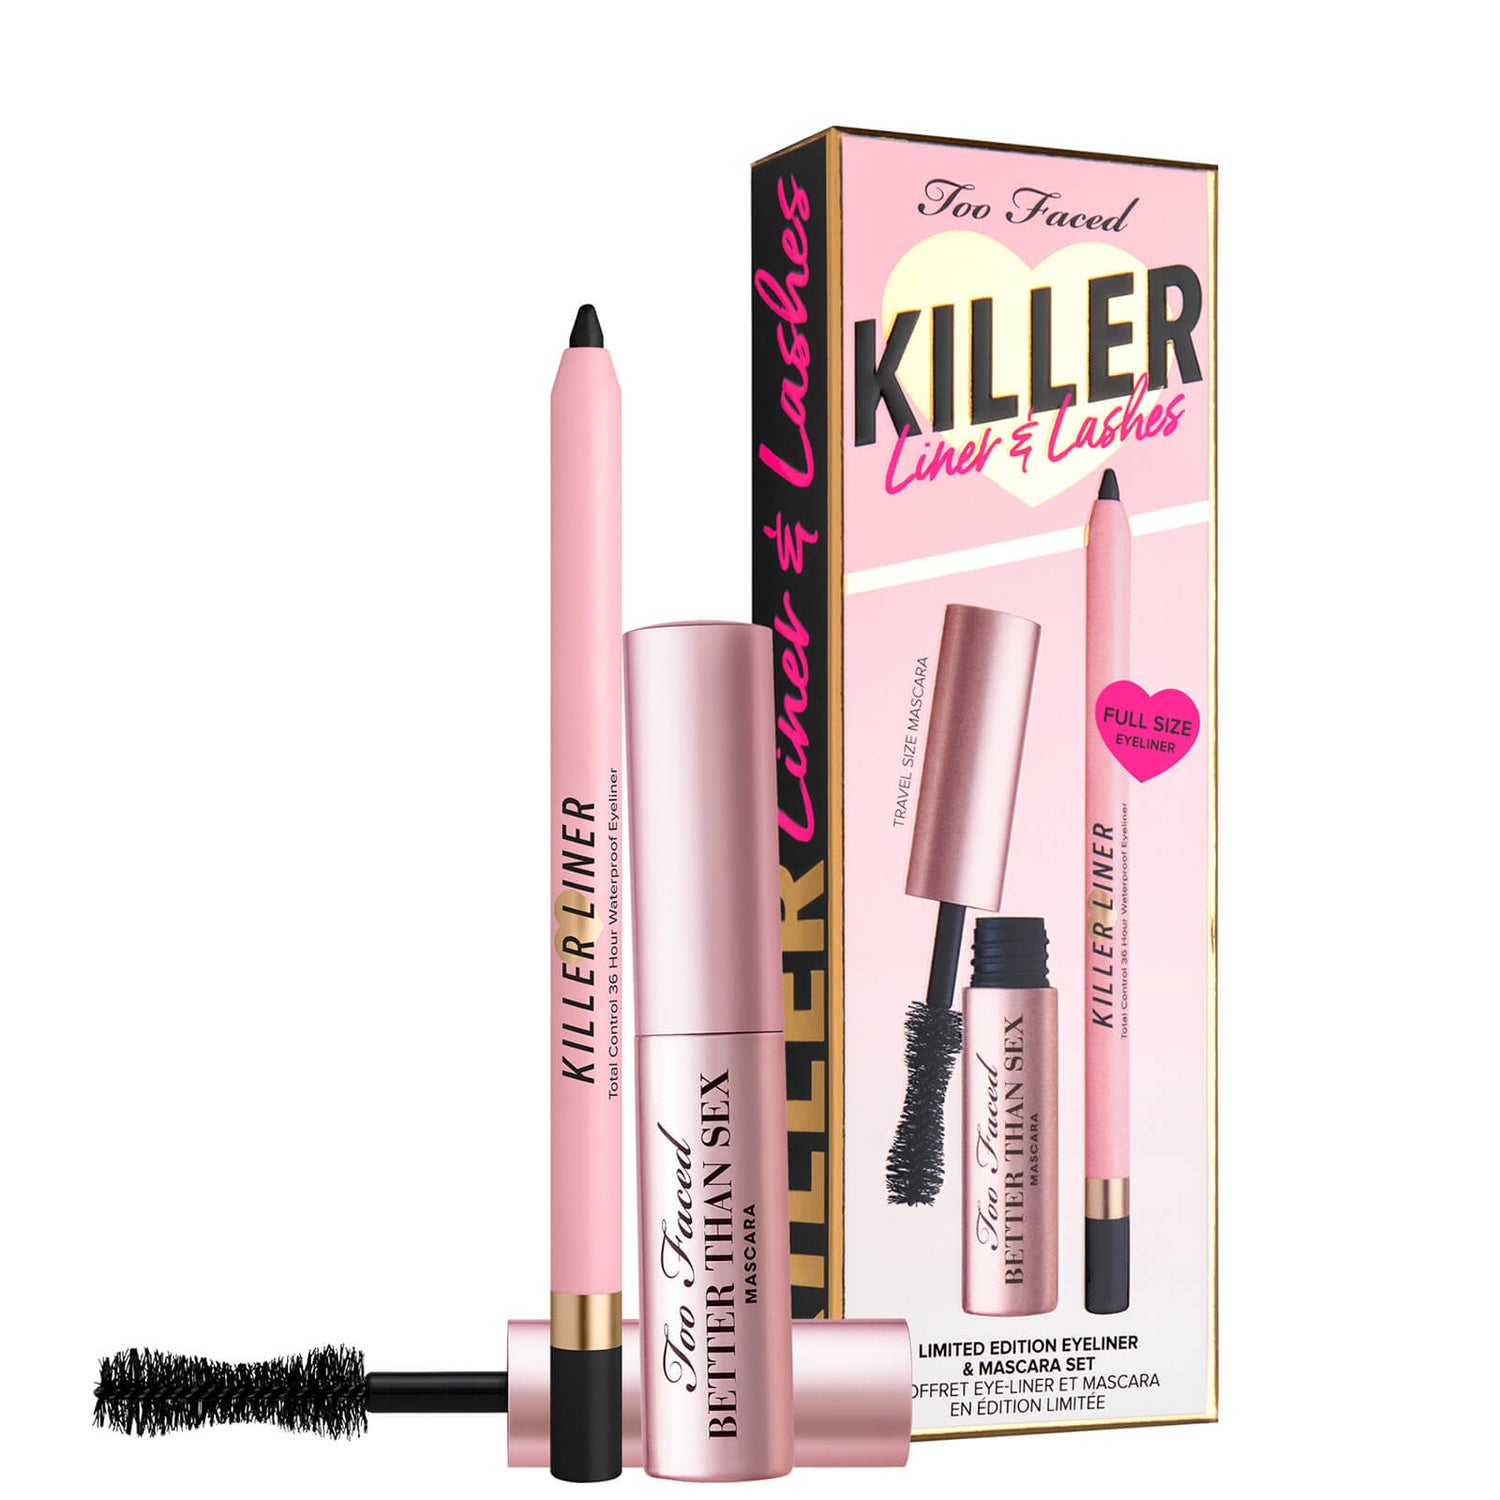 Conjunto Too Faced Limited Edition Killer Lashes and Liner Mascara and Eyeliner Duo (Vale 32.59€)